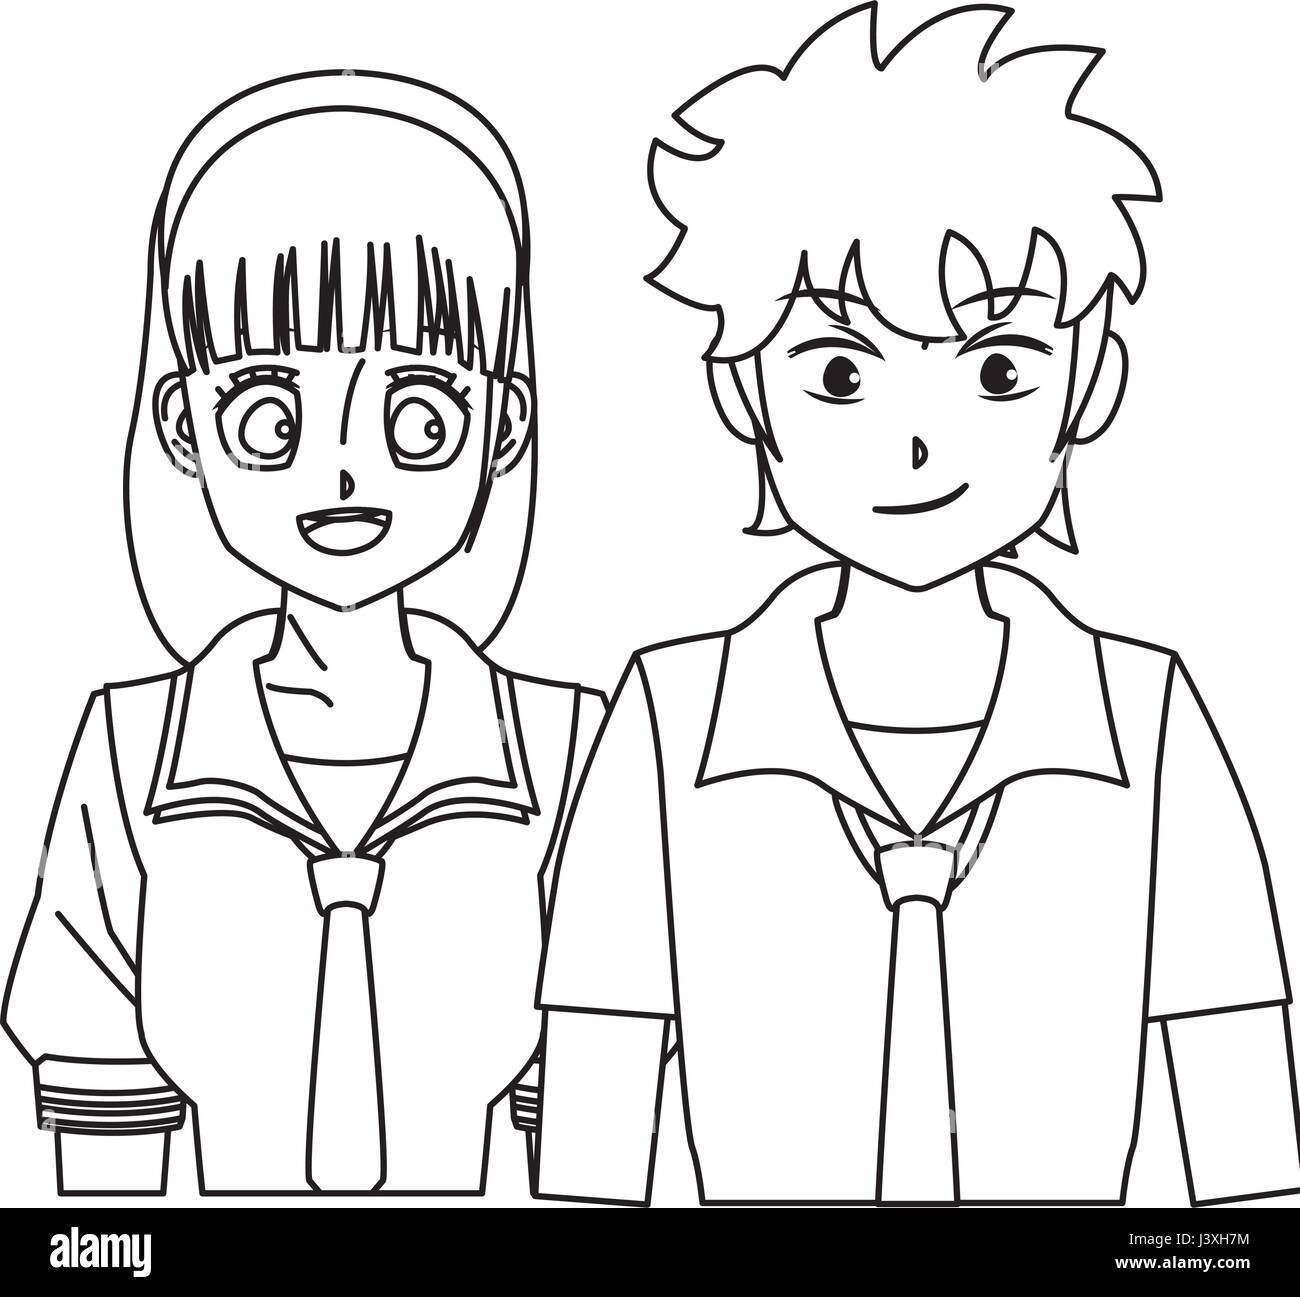 Anime Boy And Girl High Resolution Stock Photography And Images Alamy